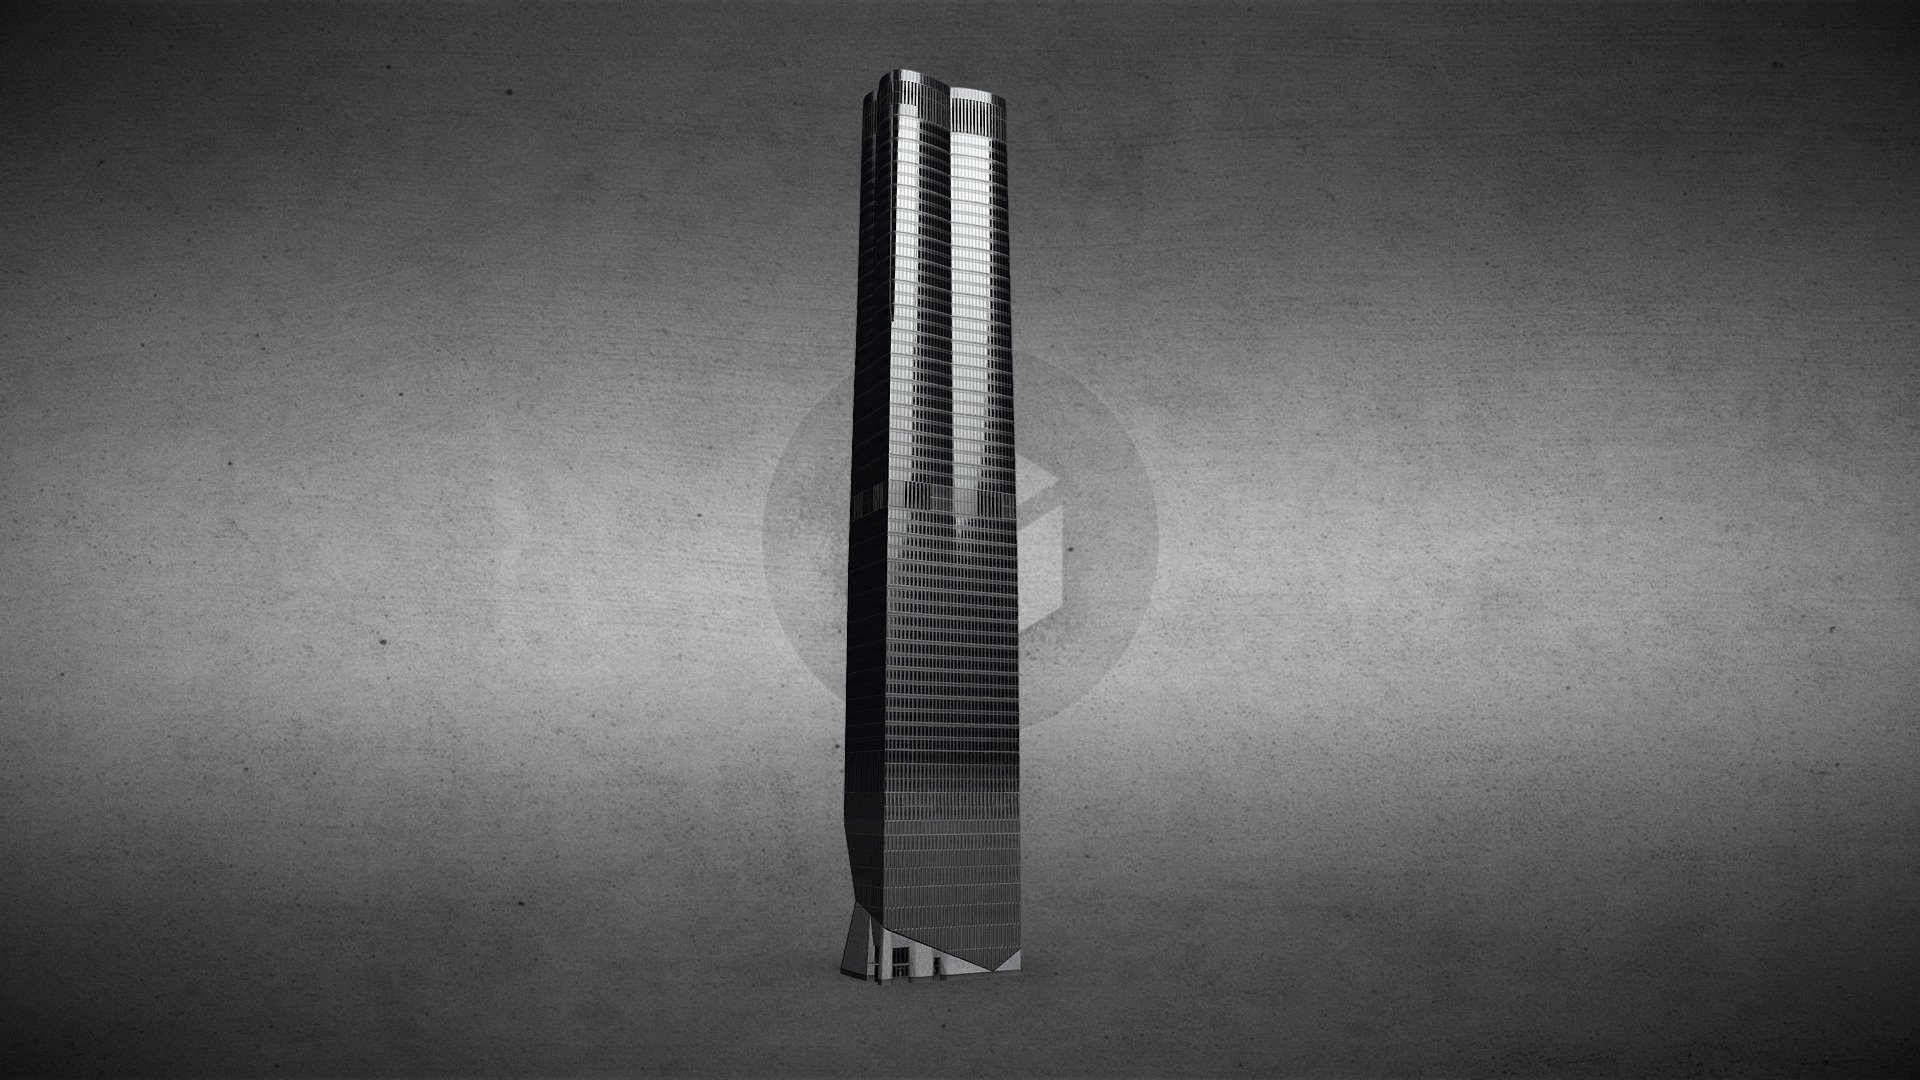 15 Hudson Yards - New York

15 Hudson Yards is a 267.7 metre skyscraper built in 2016 in Hell’s Kitchen New York.
It belongs to the extensive Hudson Yards complex and is the first completed building.

Created and adapted for the game &ldquo;Cities Skylines